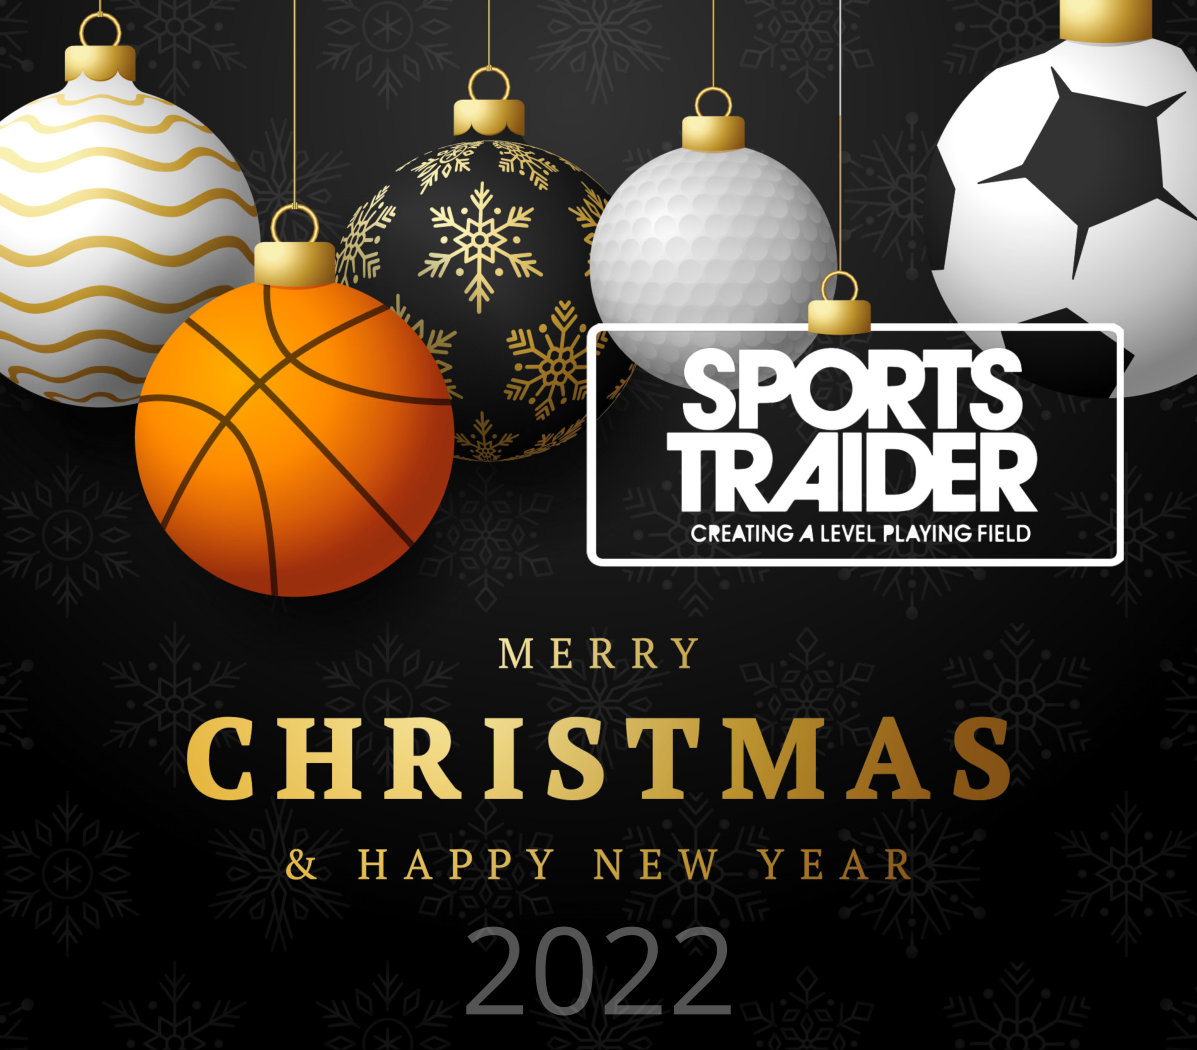 From SportsTraider we would like to say a big thank you to all the people who have contributed to SportsTraider our Staff, friends, and Sponsors. We wish you all a very Merry 2022 Christmas and a Happy New Year #happyNewYear #helplingthecommunity #working2gether